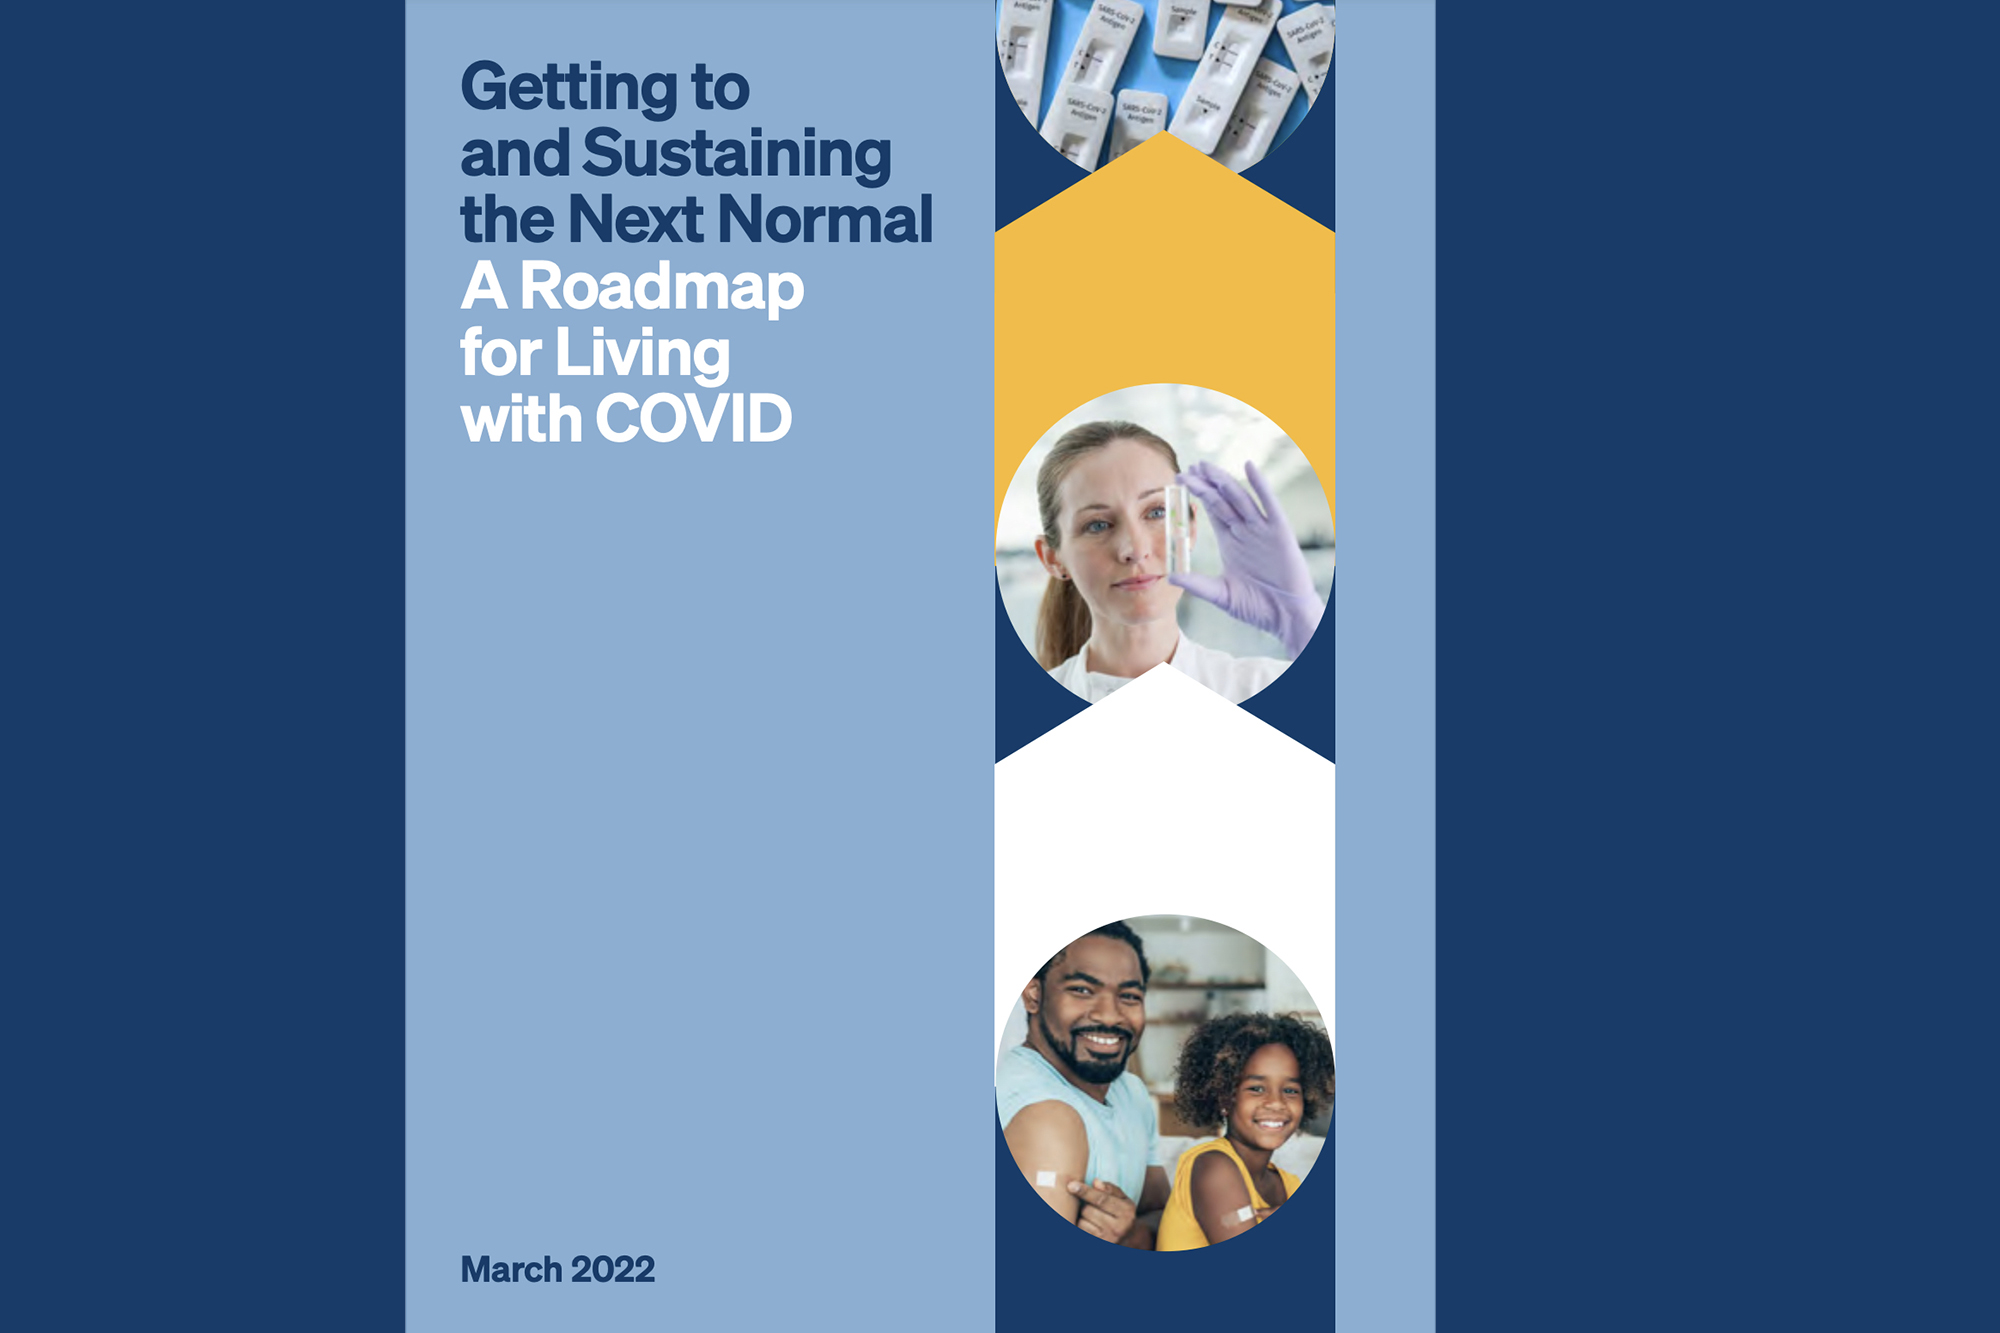 A book cover with the words "Getting to and Sustaining the Next Normal A Roadmap for Living with COVID." On the right side are three images in circles, of COVID at-home tests, a person holding a vial in a rubber gloved hand, and an adult and child showing their arms, indicating they got vaccinated in the spot where there's a Band-Aid..